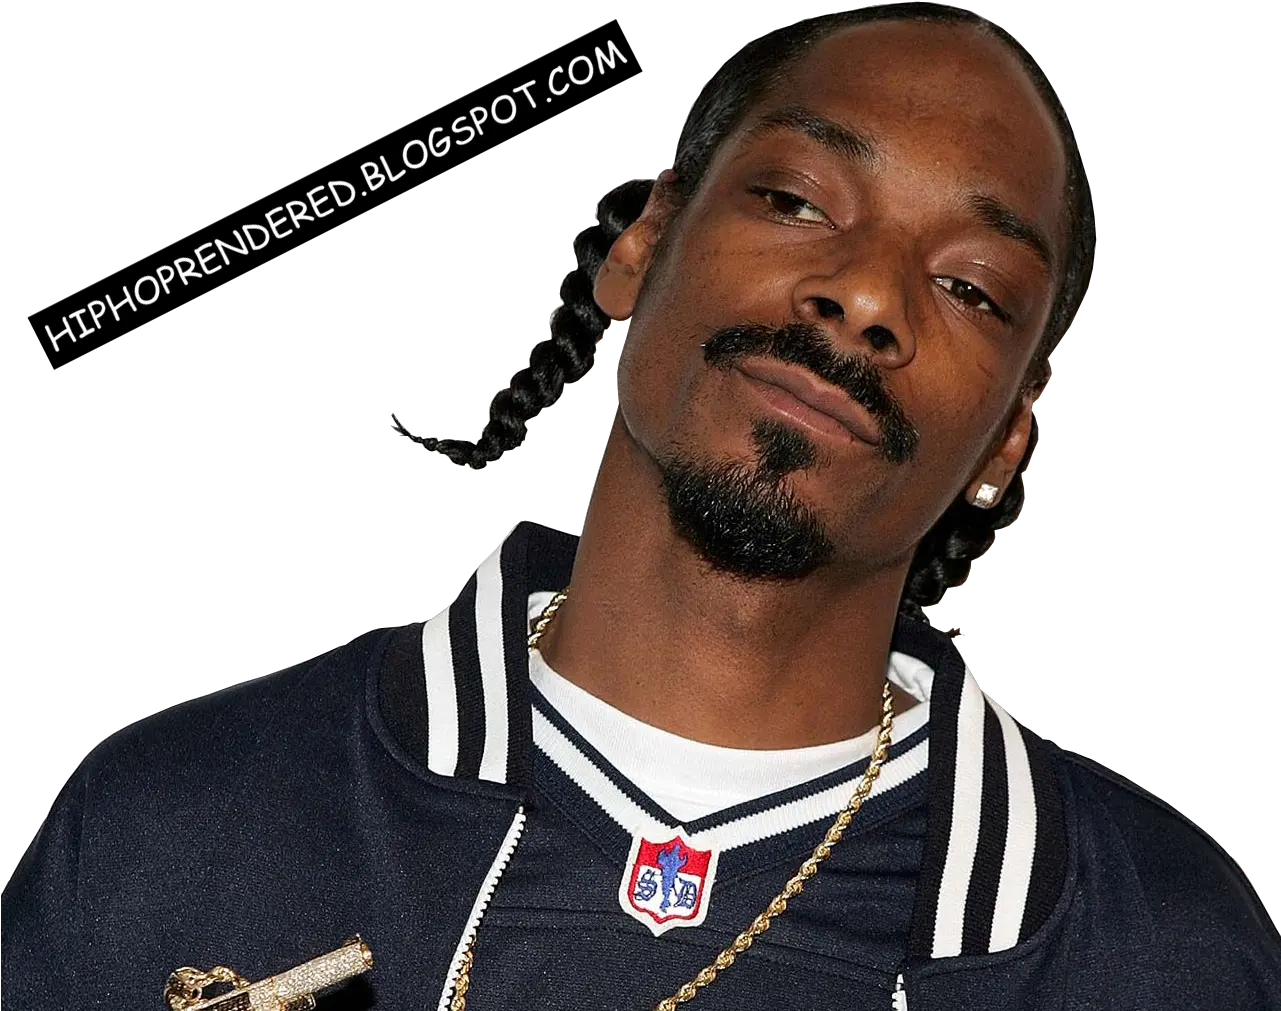 Reach Me Via Email Snoop Dogg Render Png Snoop Dogg Png